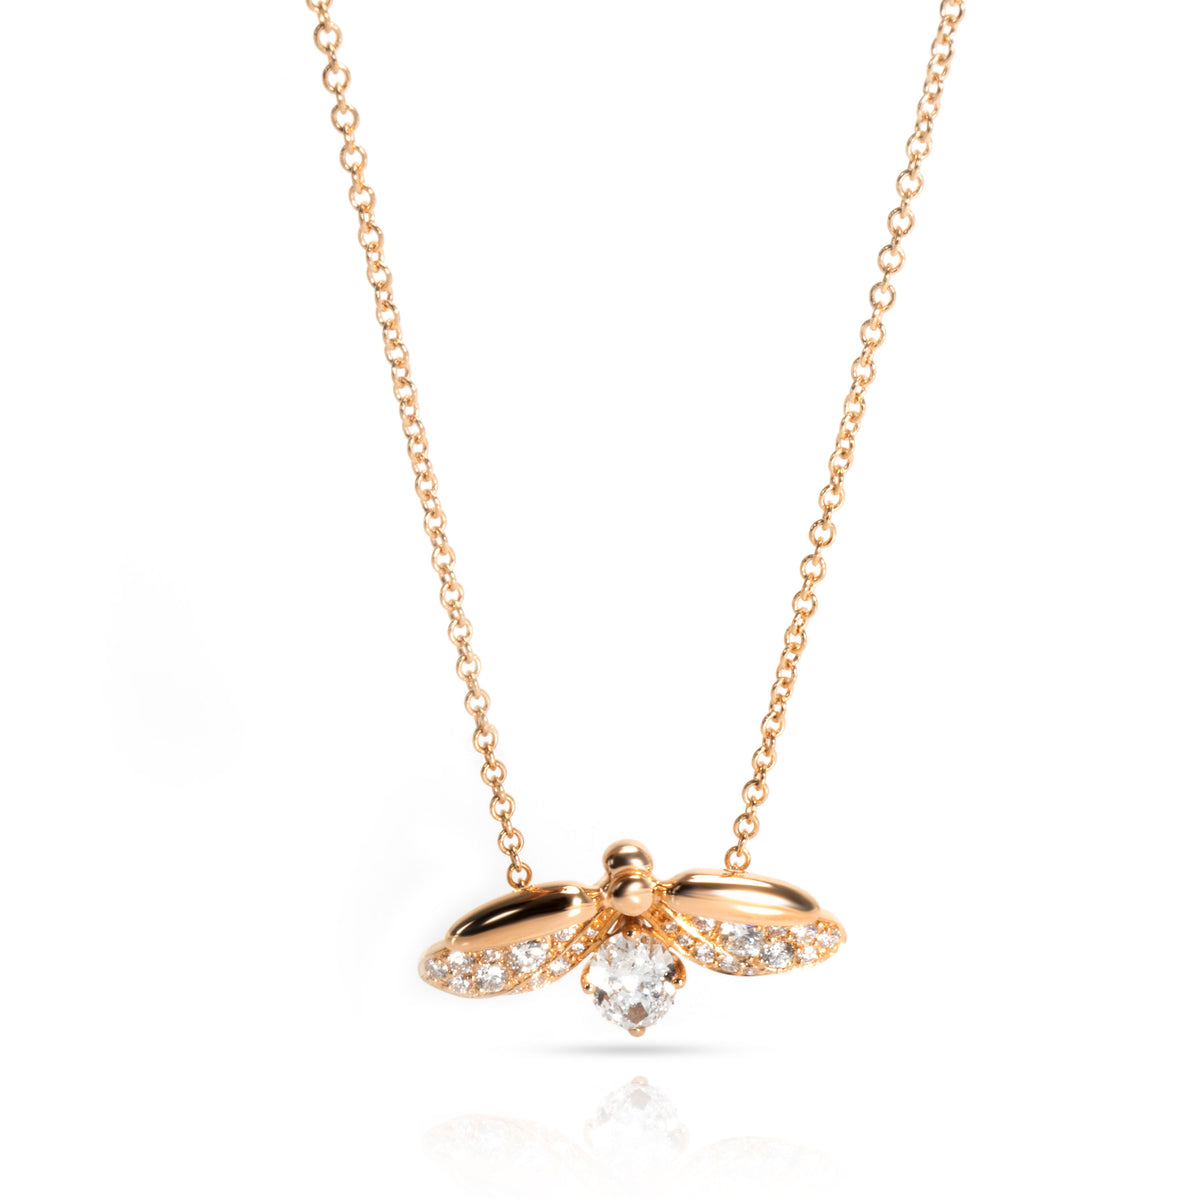 Tiffany & Co. Paper Flower Diamond Firefly Necklace in 18K Rose Gold 0.38 CTW